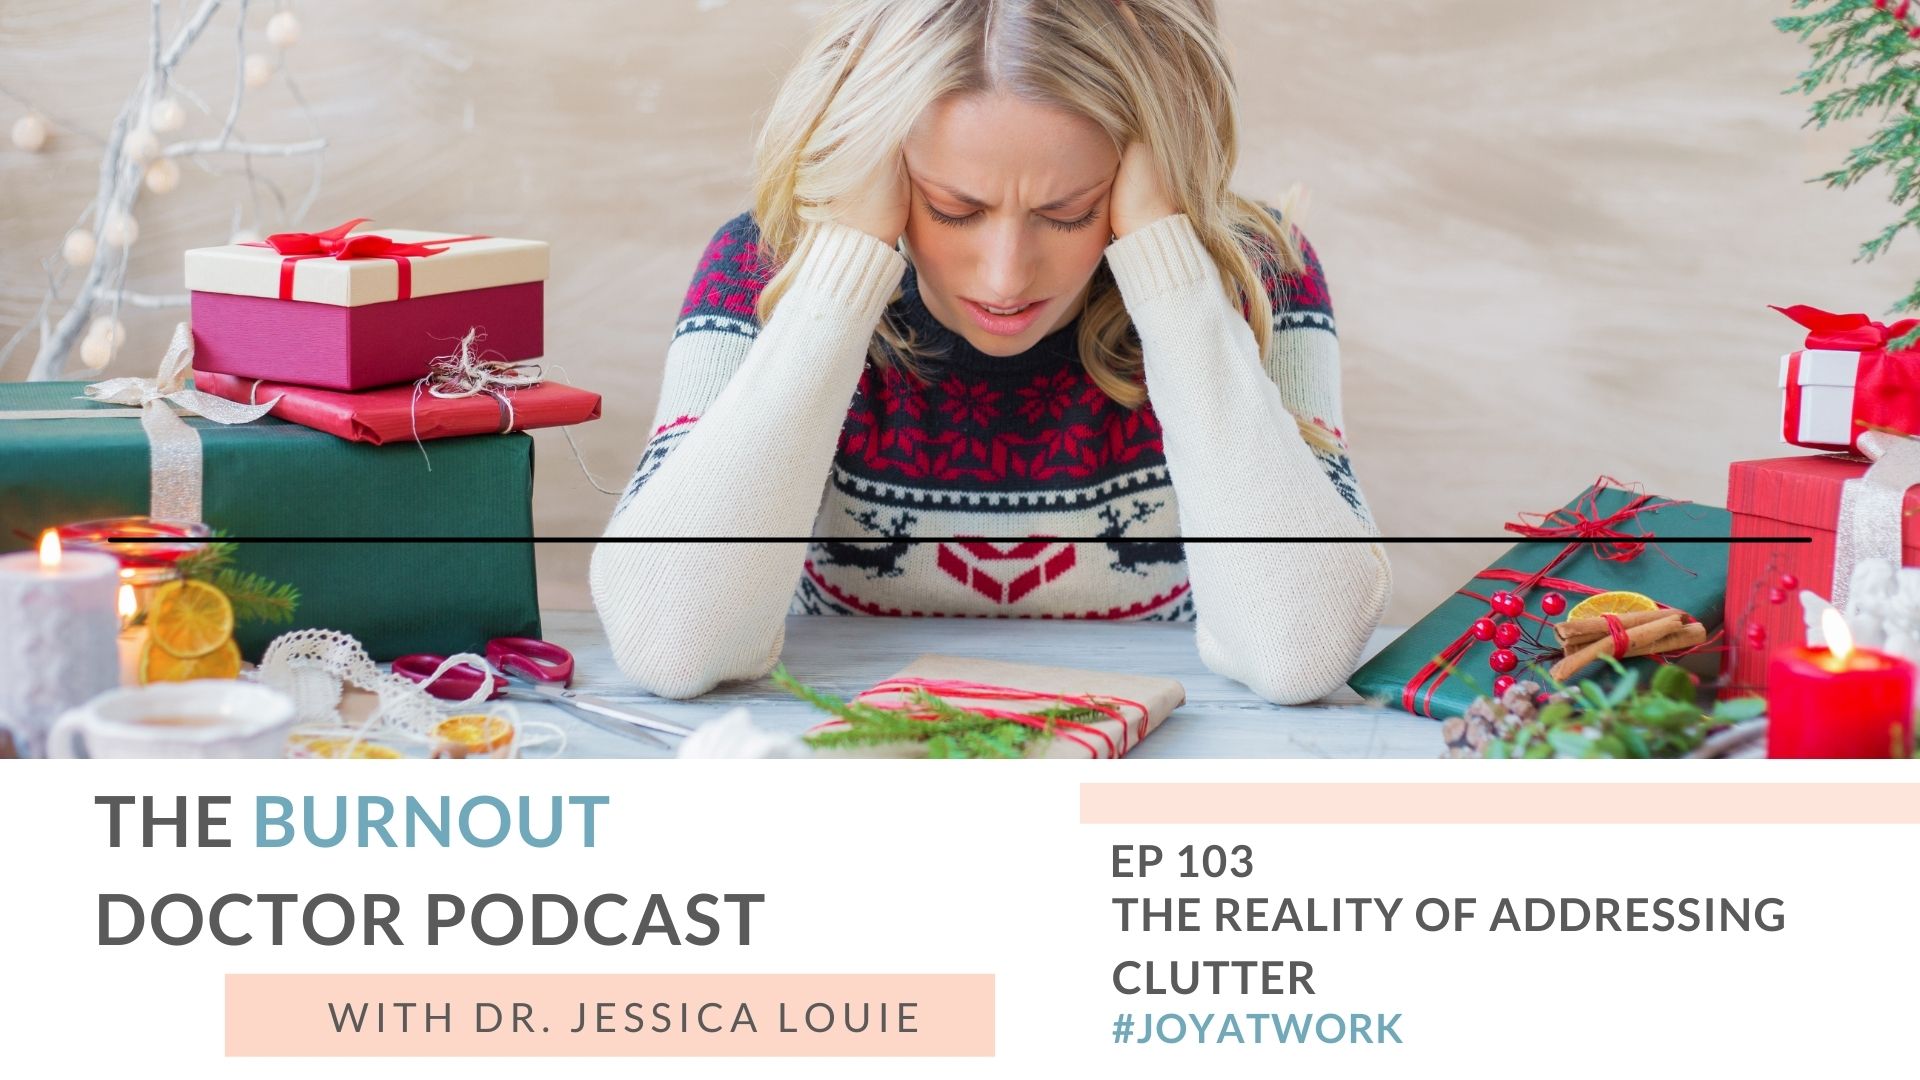 The reality of address clutter, why do have fear about the clutter in our lives. Pharmacist burnout help. KonMari Method Los Angeles Playa Vista with Dr. Jessica Louie. The Burnout Doctor Podcast.